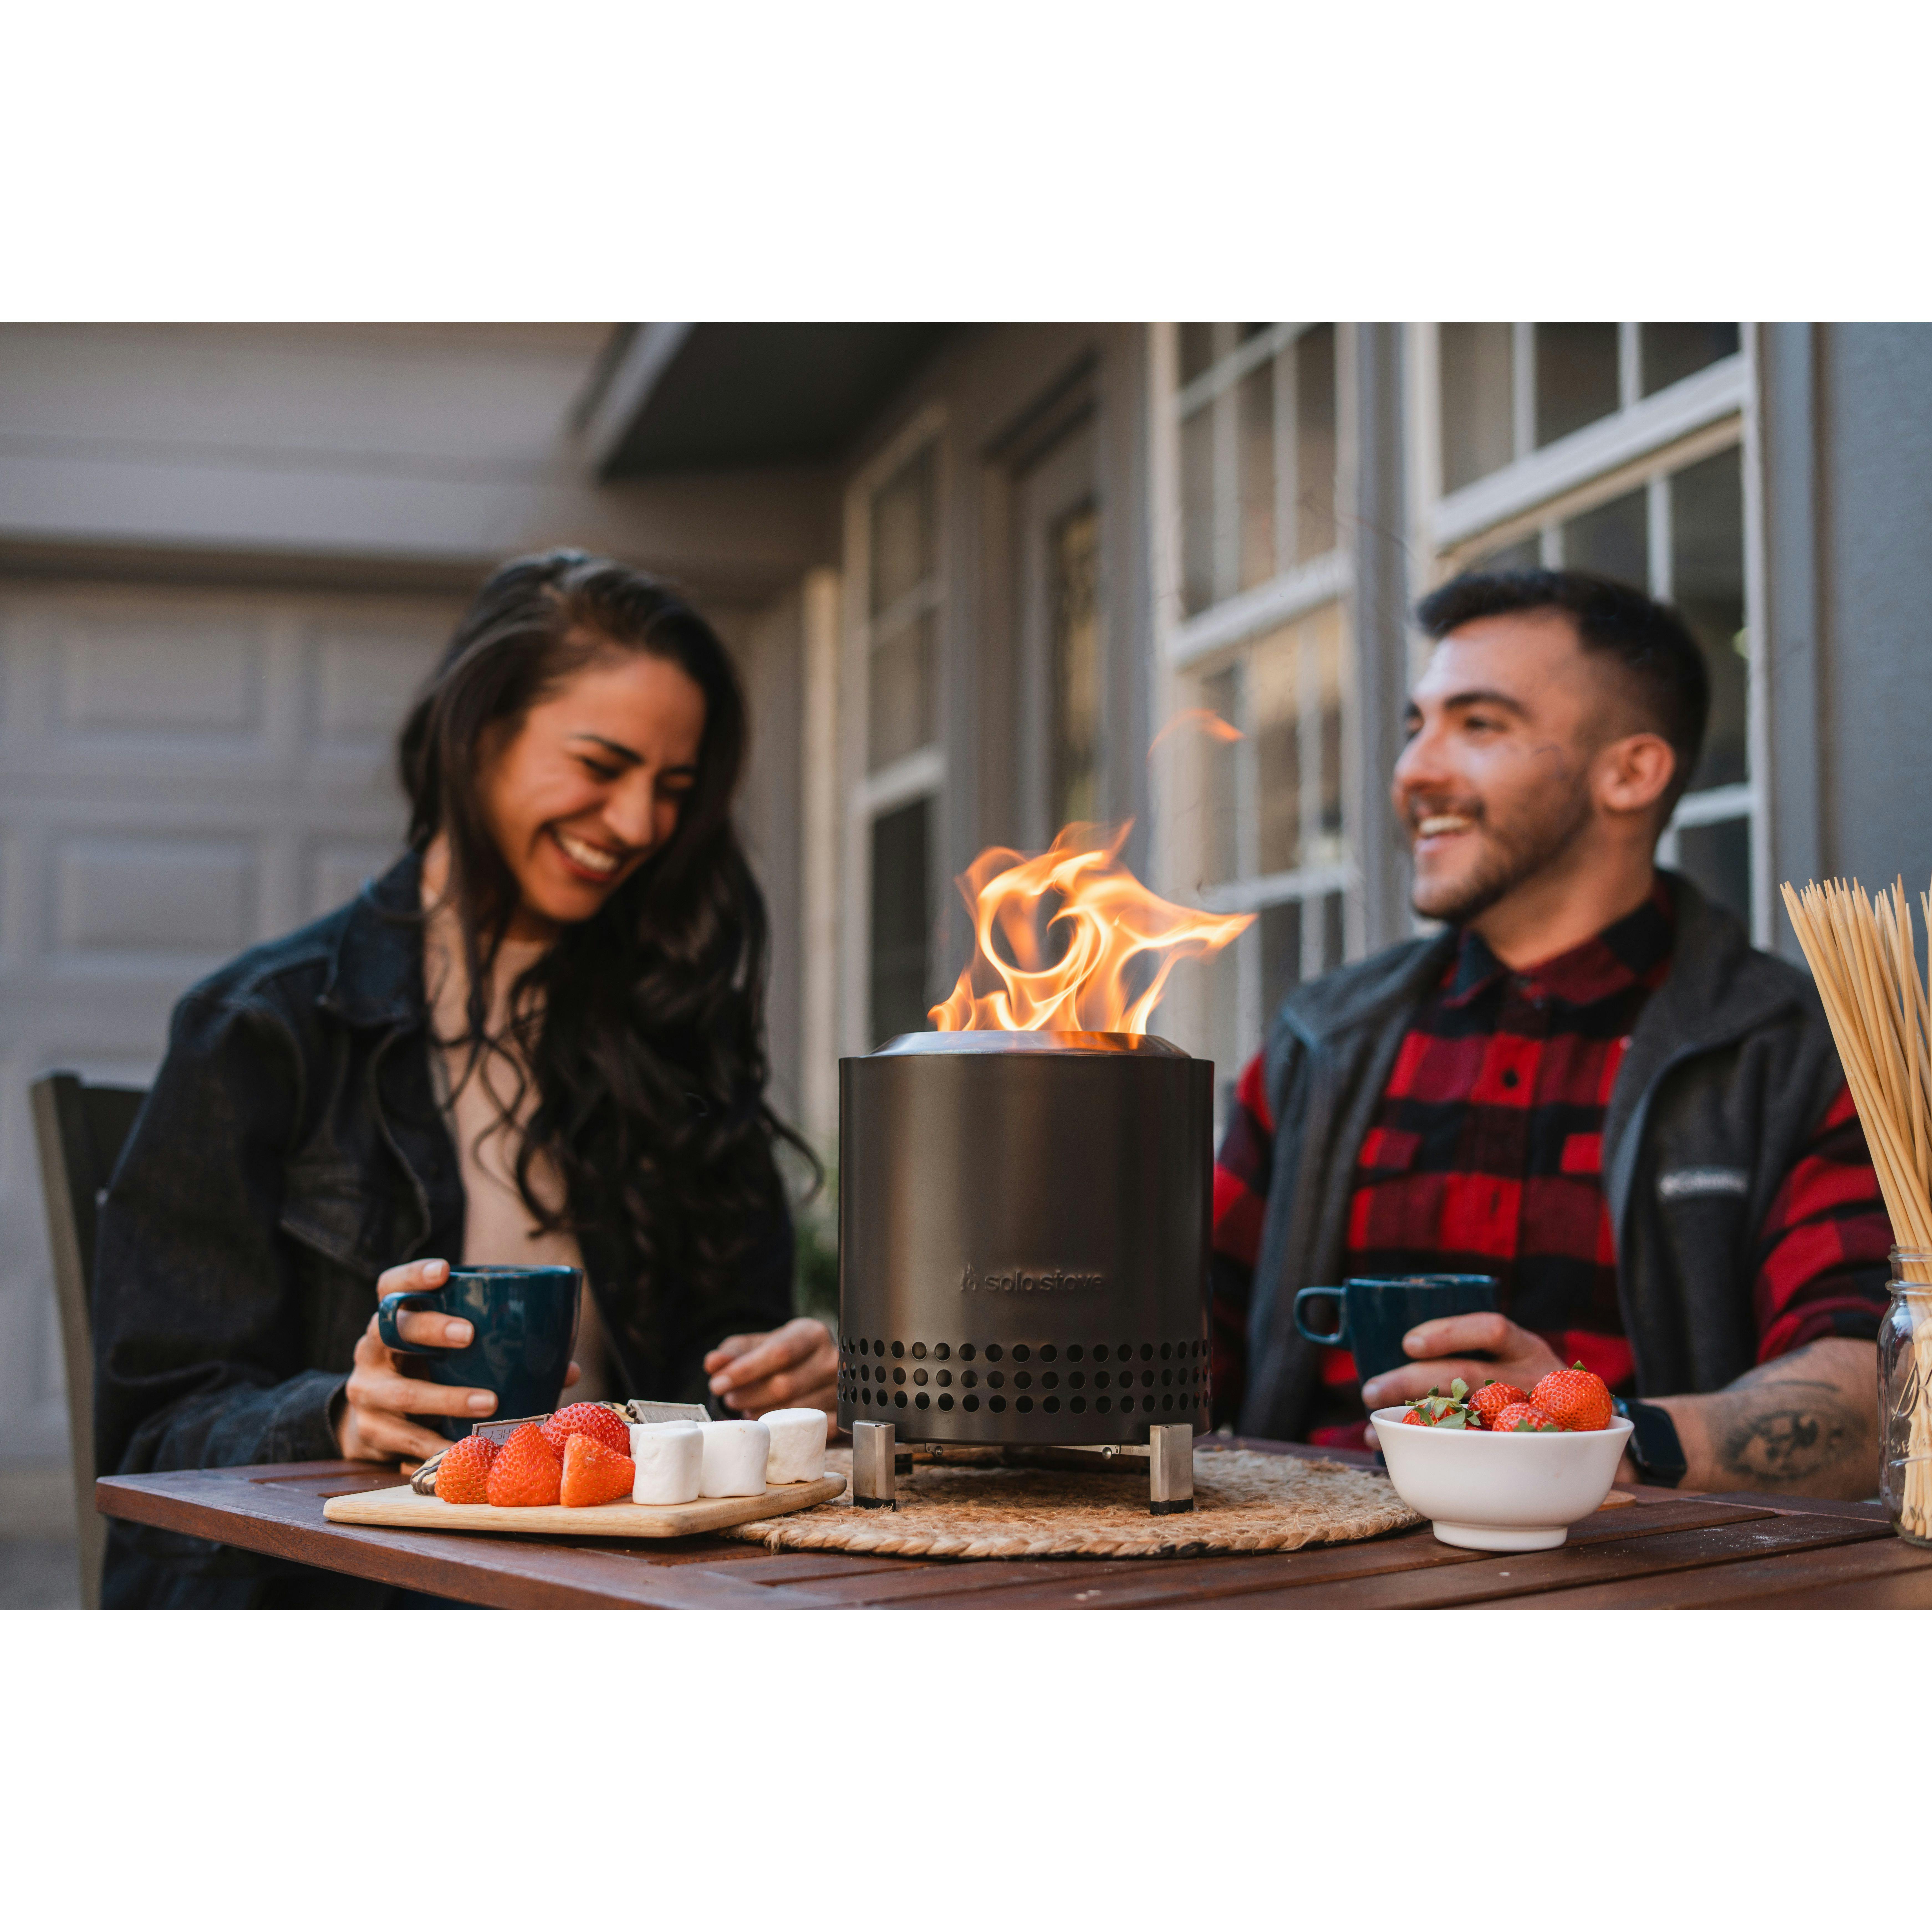 Solo Stove Mesa XL Table Top Fire Pit